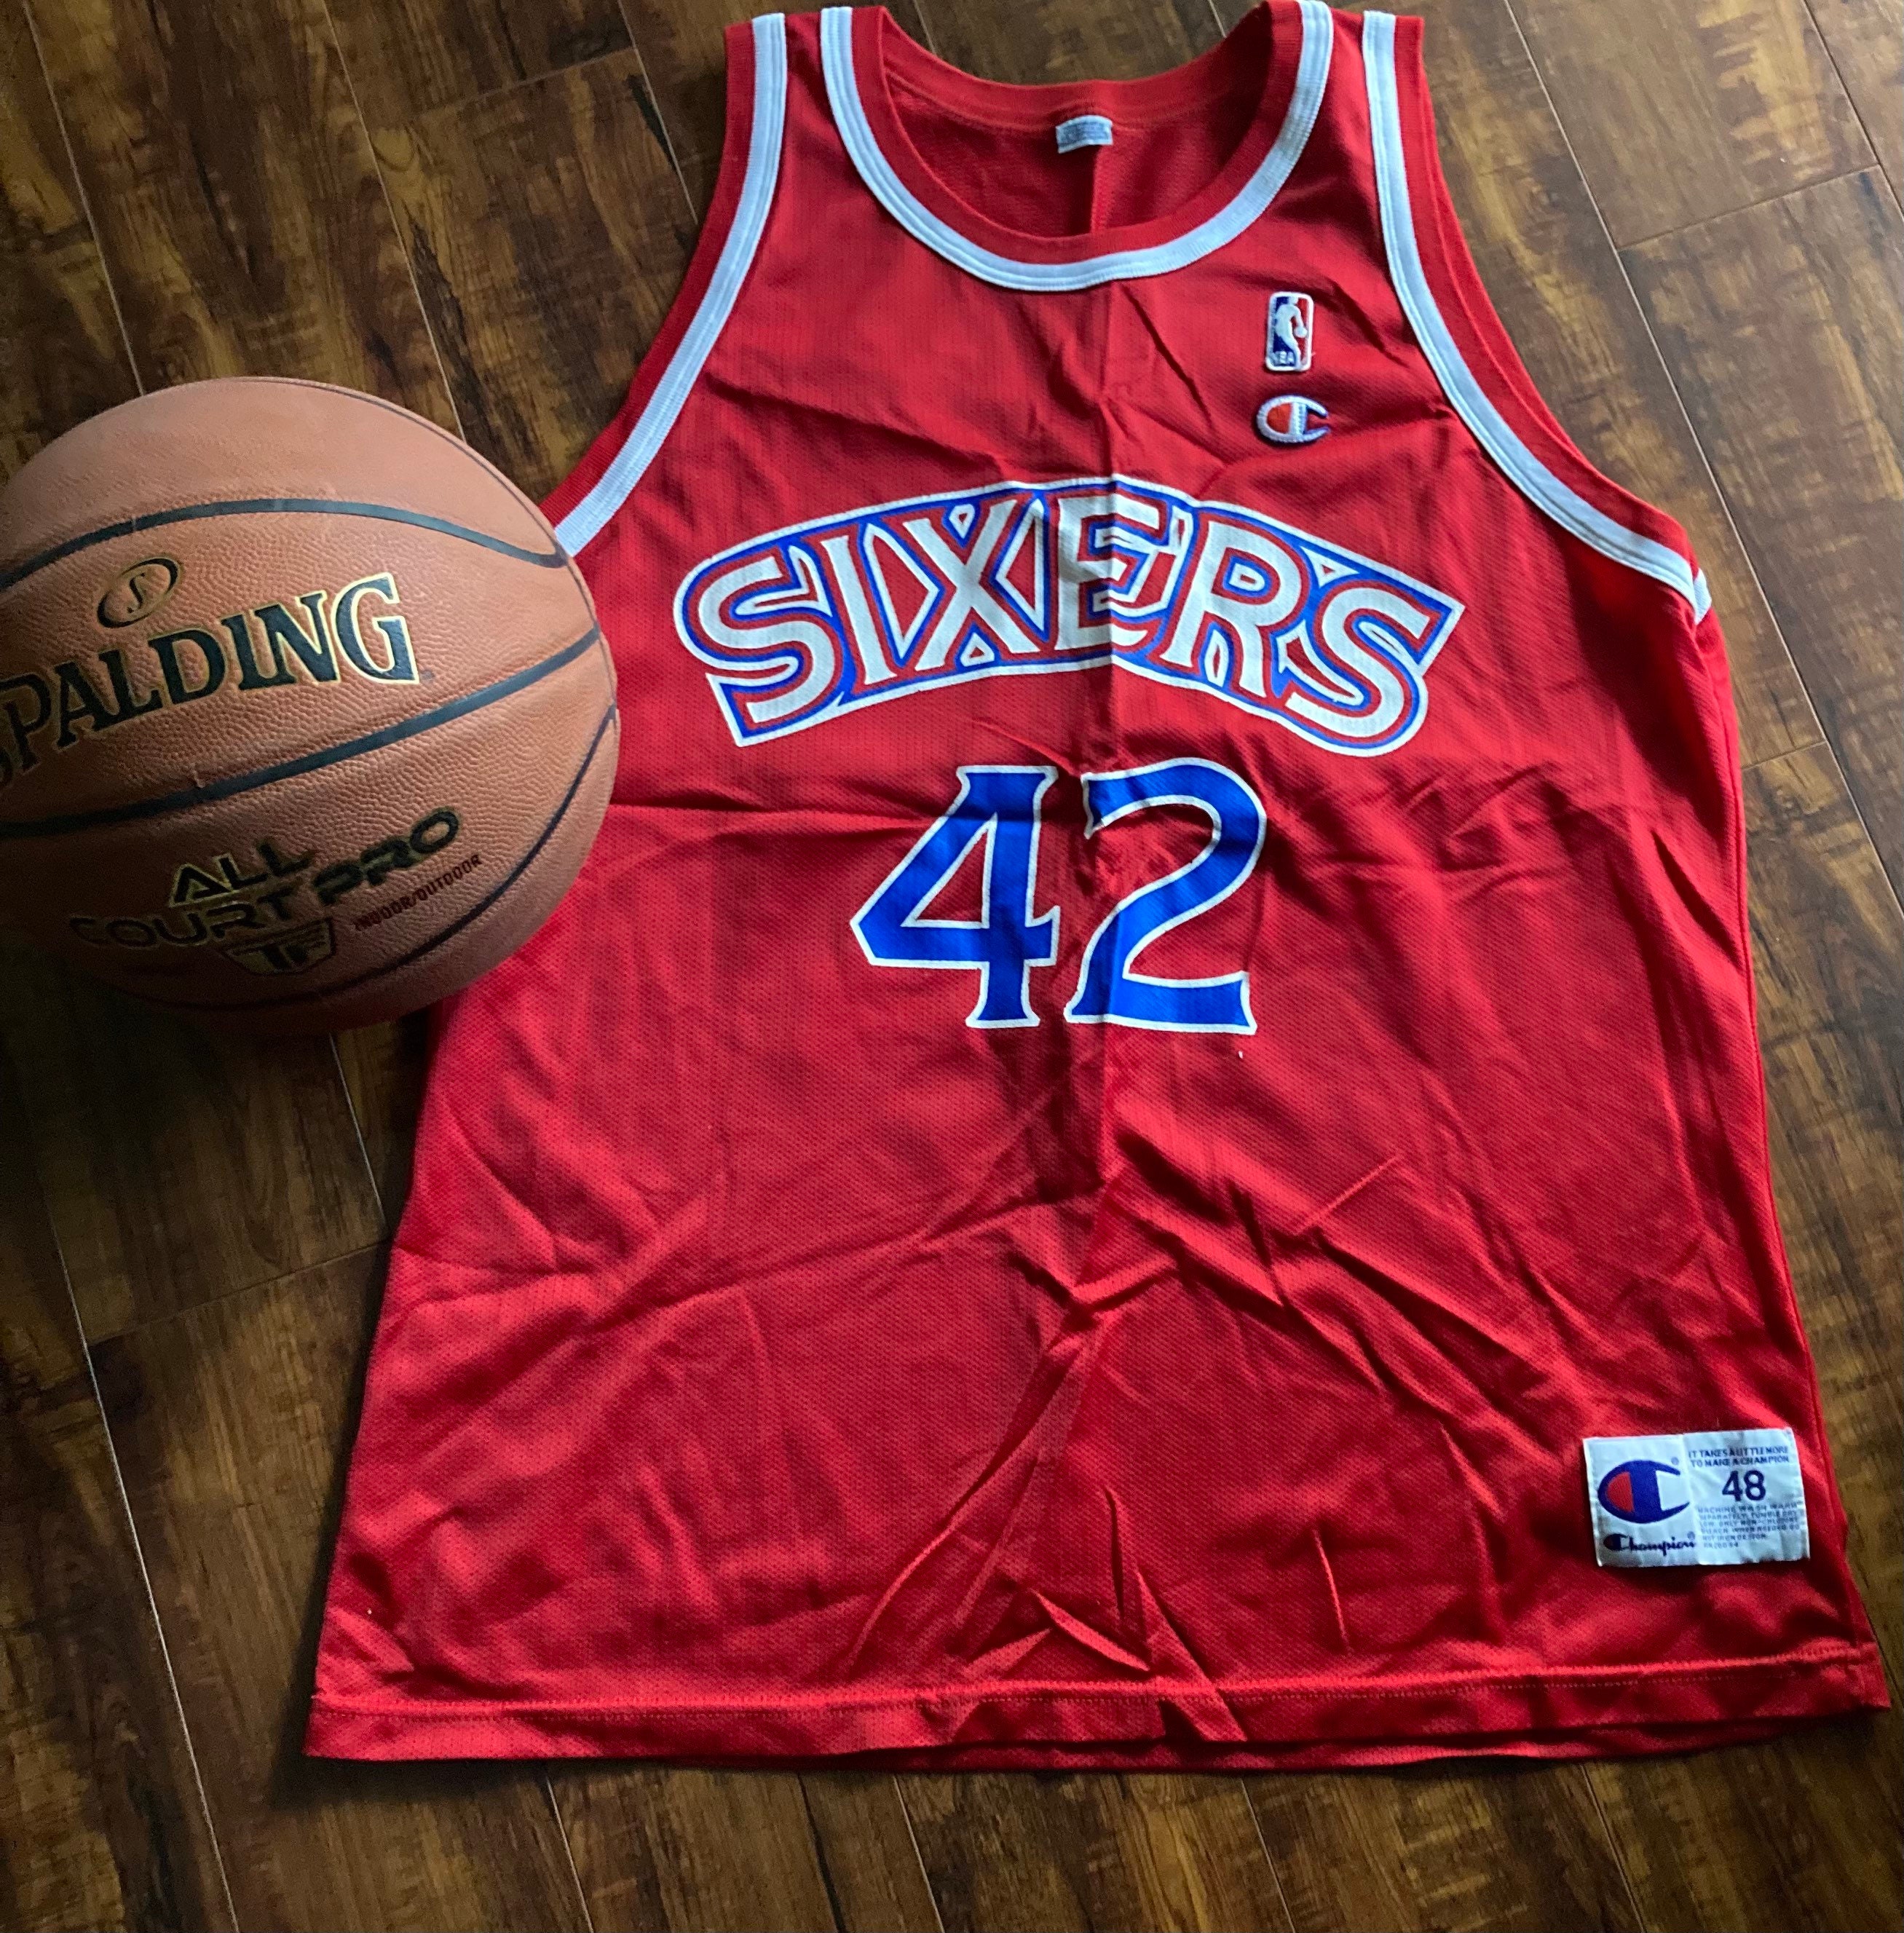 Vintage Champion NBA SIXERS Red Jersey Sz48 Philadelphia 76ers STACKHOUSE  philly